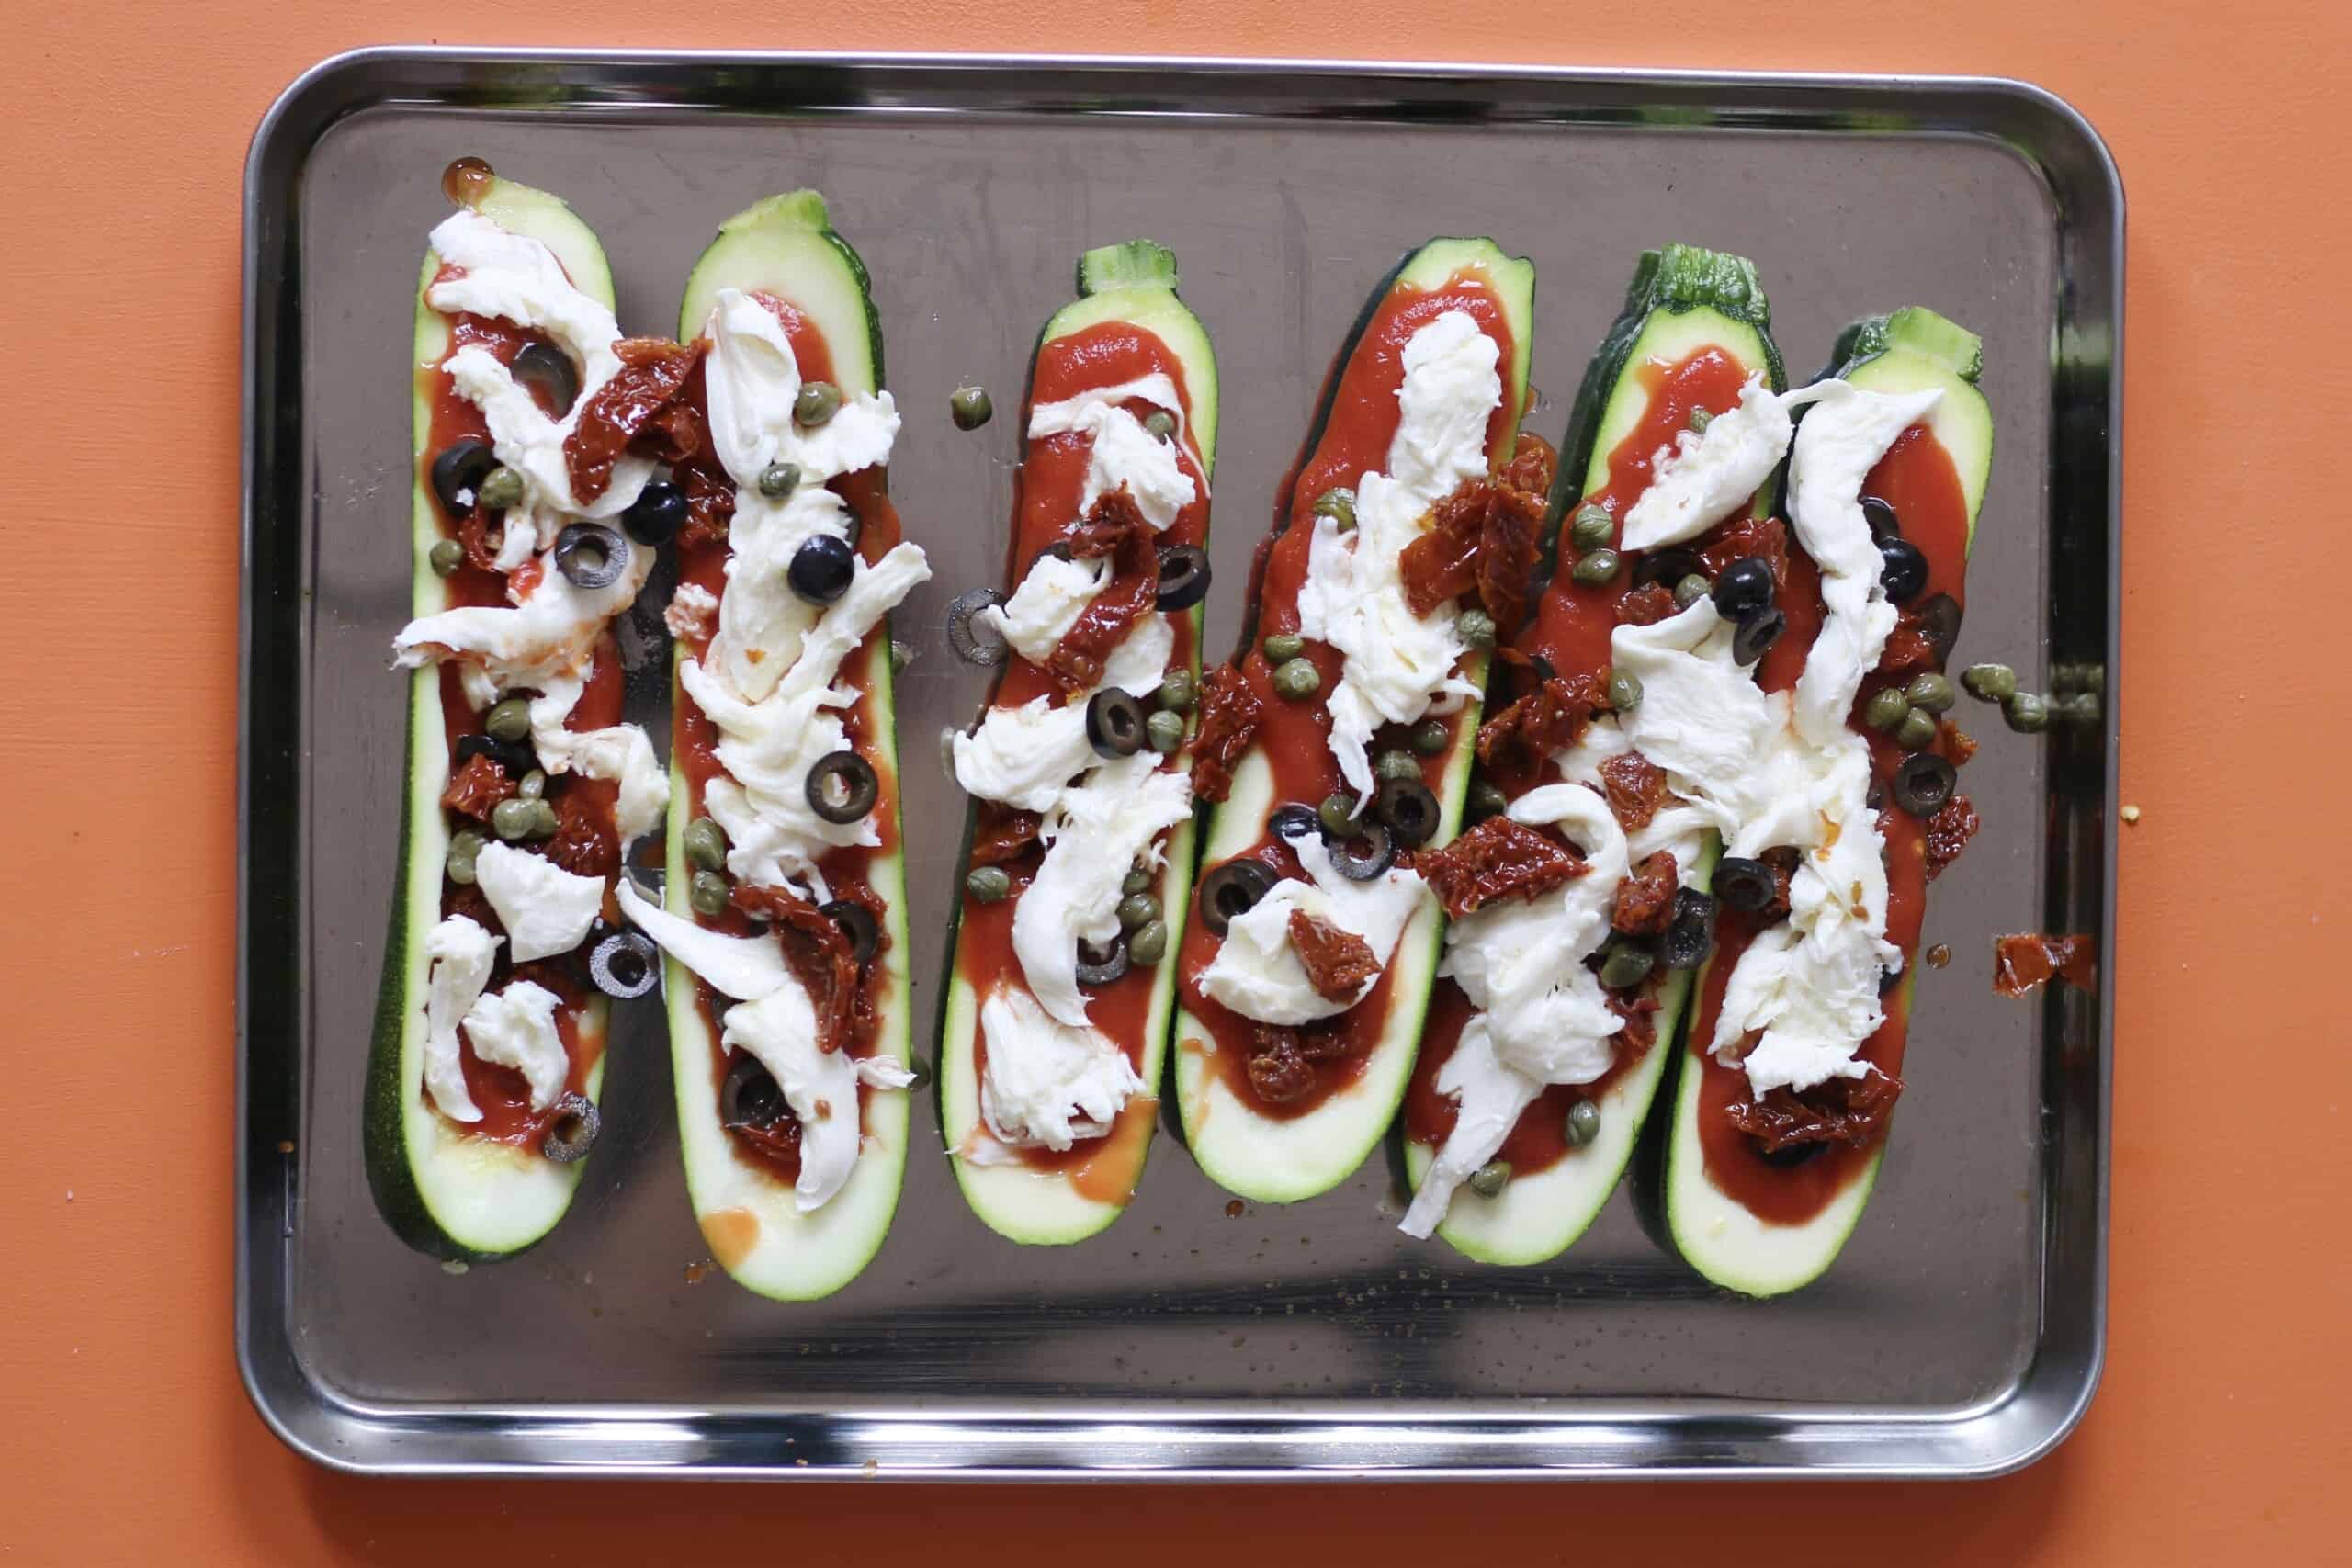 Courgette boats with mozzarella, olives and pasta filling on baking tray